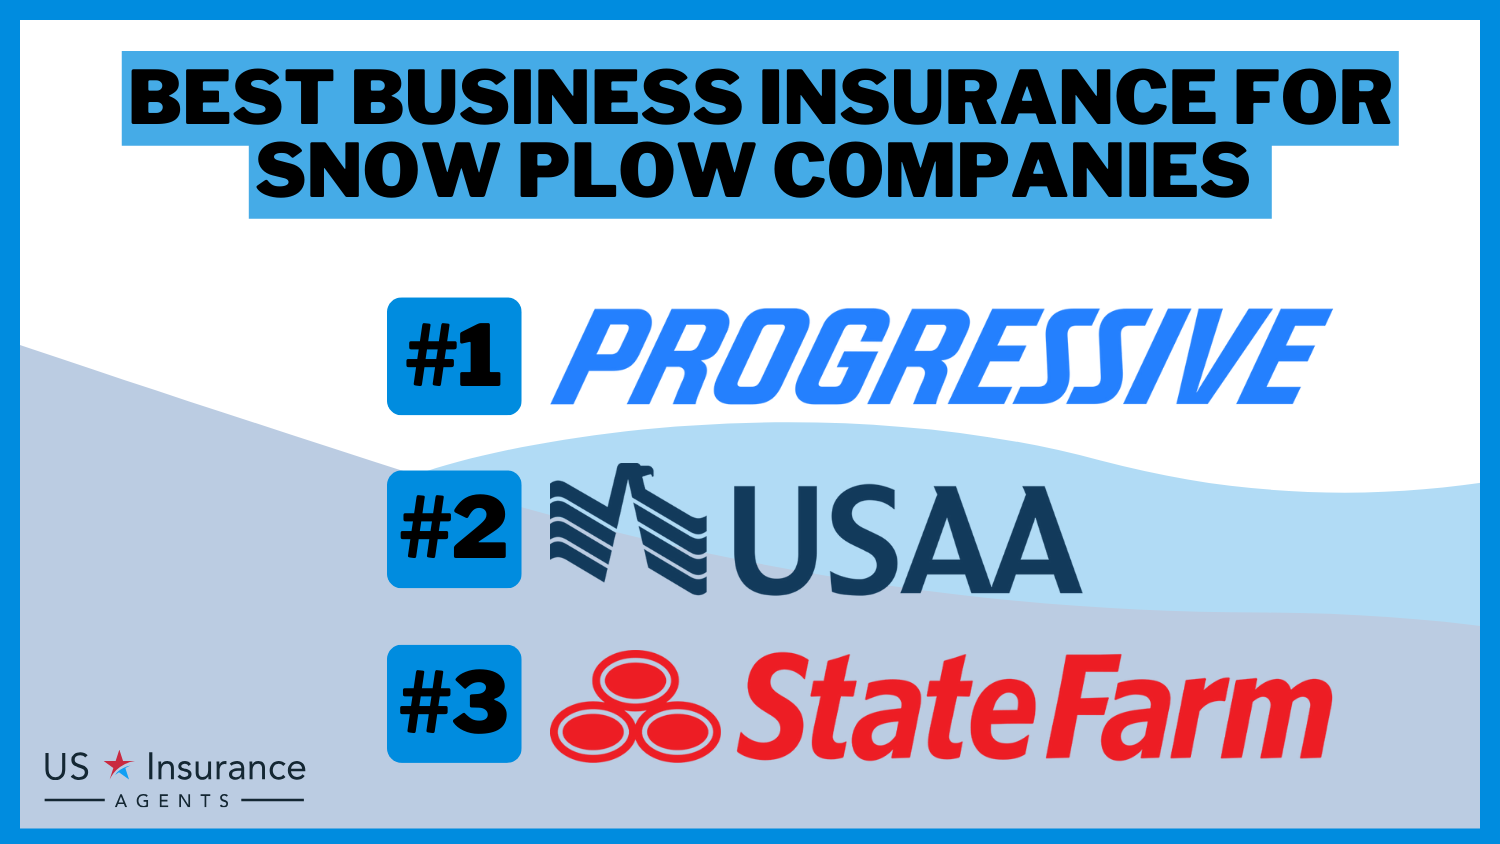 3 Best Business Insurance for Snow Plow Companies: Progressive, USAA, and State Farm.